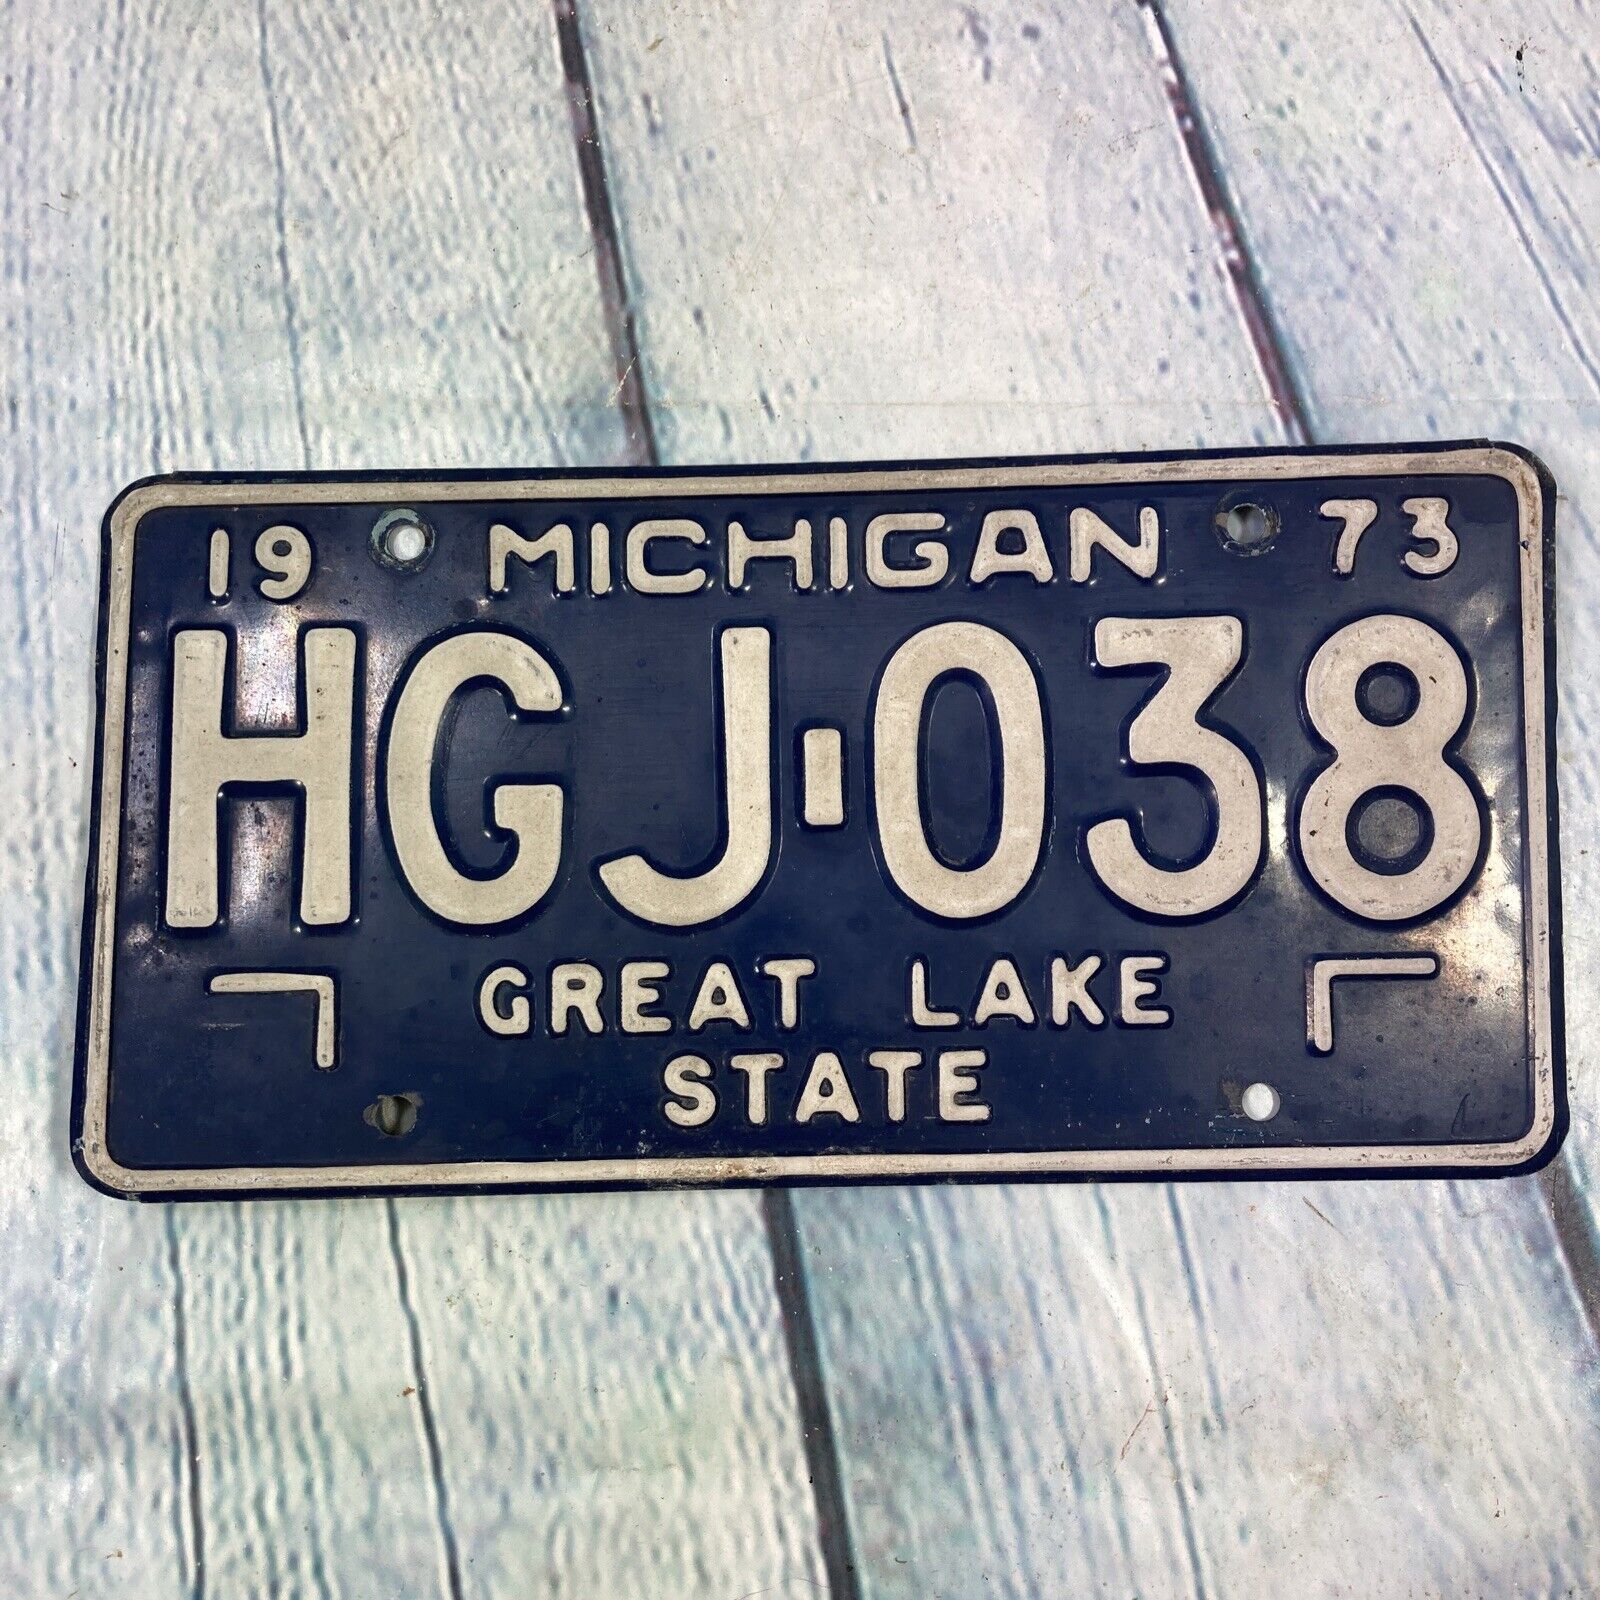 Vintage Michigan License Plate Tag Sign 1973 Blue Great Lake Man Cave HGJ-038